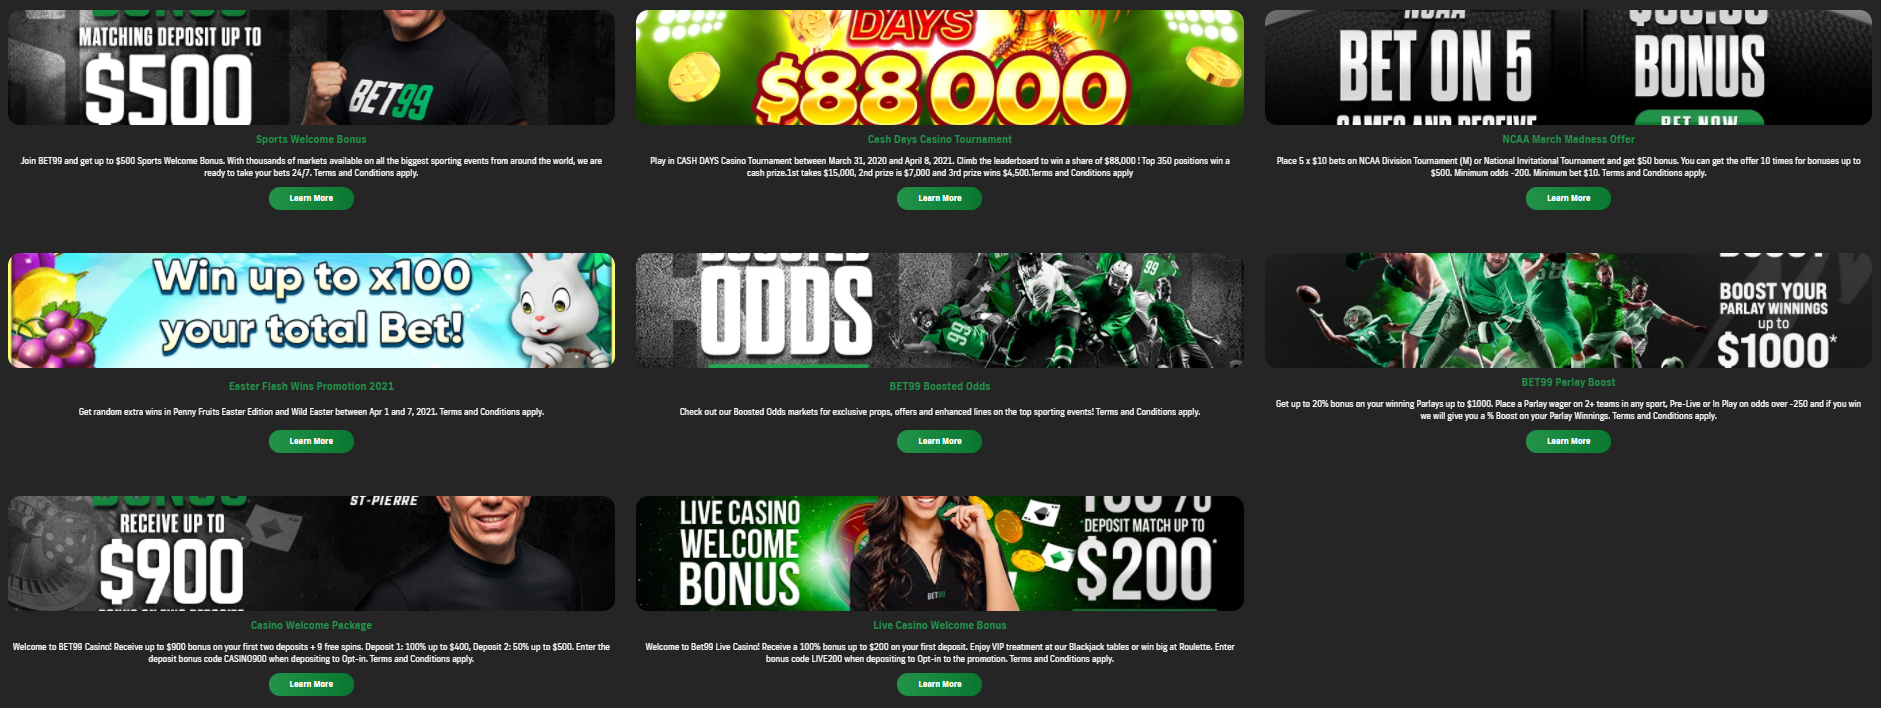 bet99 promotions